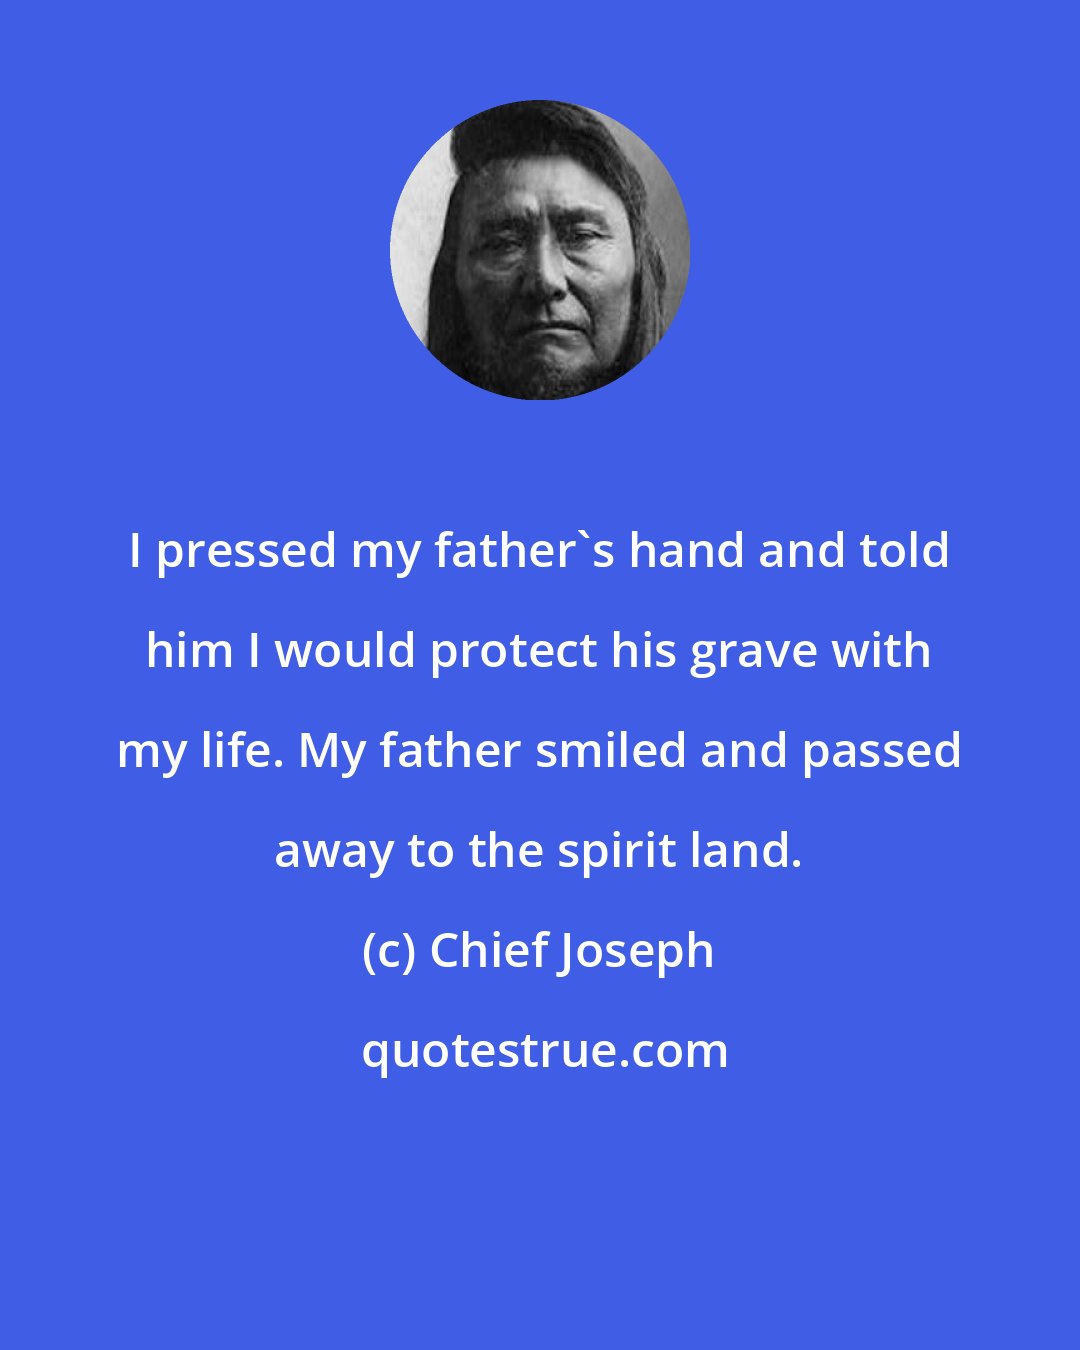 Chief Joseph: I pressed my father's hand and told him I would protect his grave with my life. My father smiled and passed away to the spirit land.